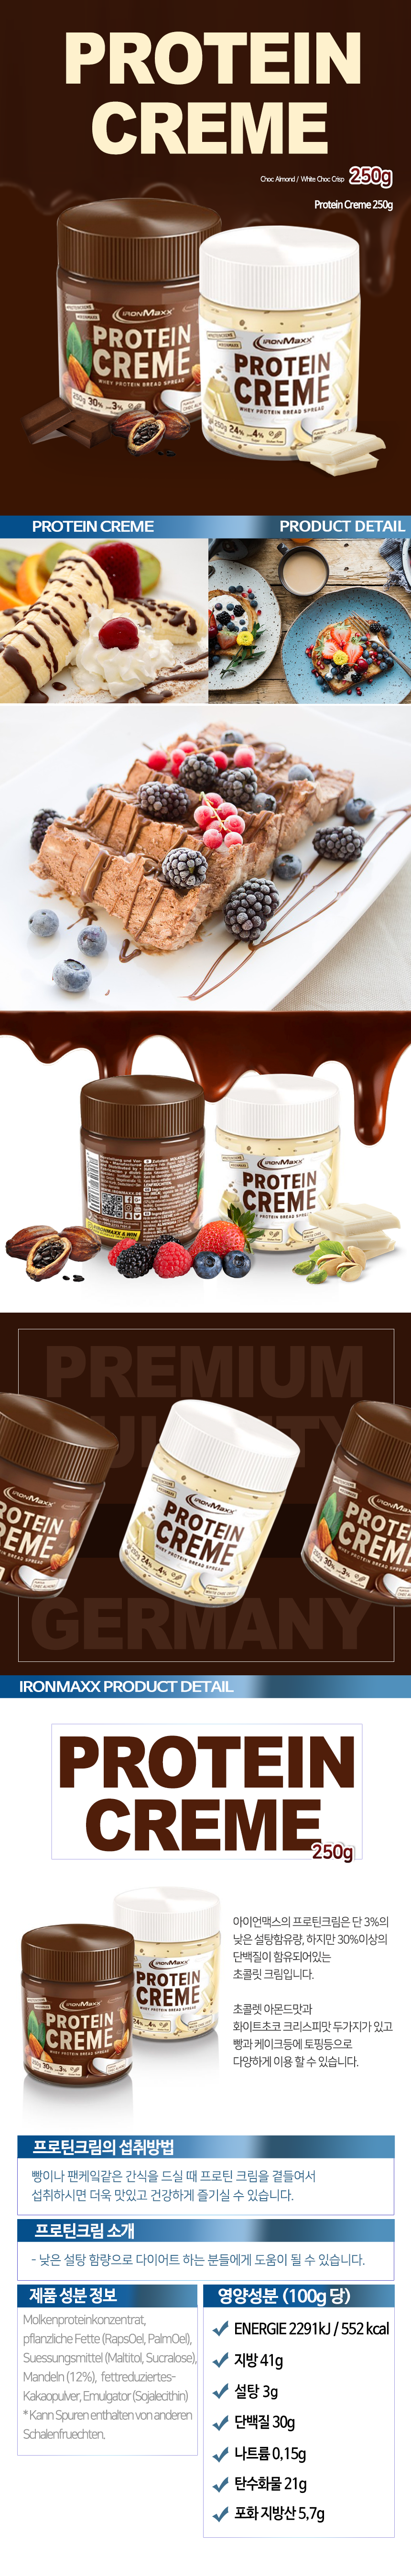 Protein-creme_152208.png